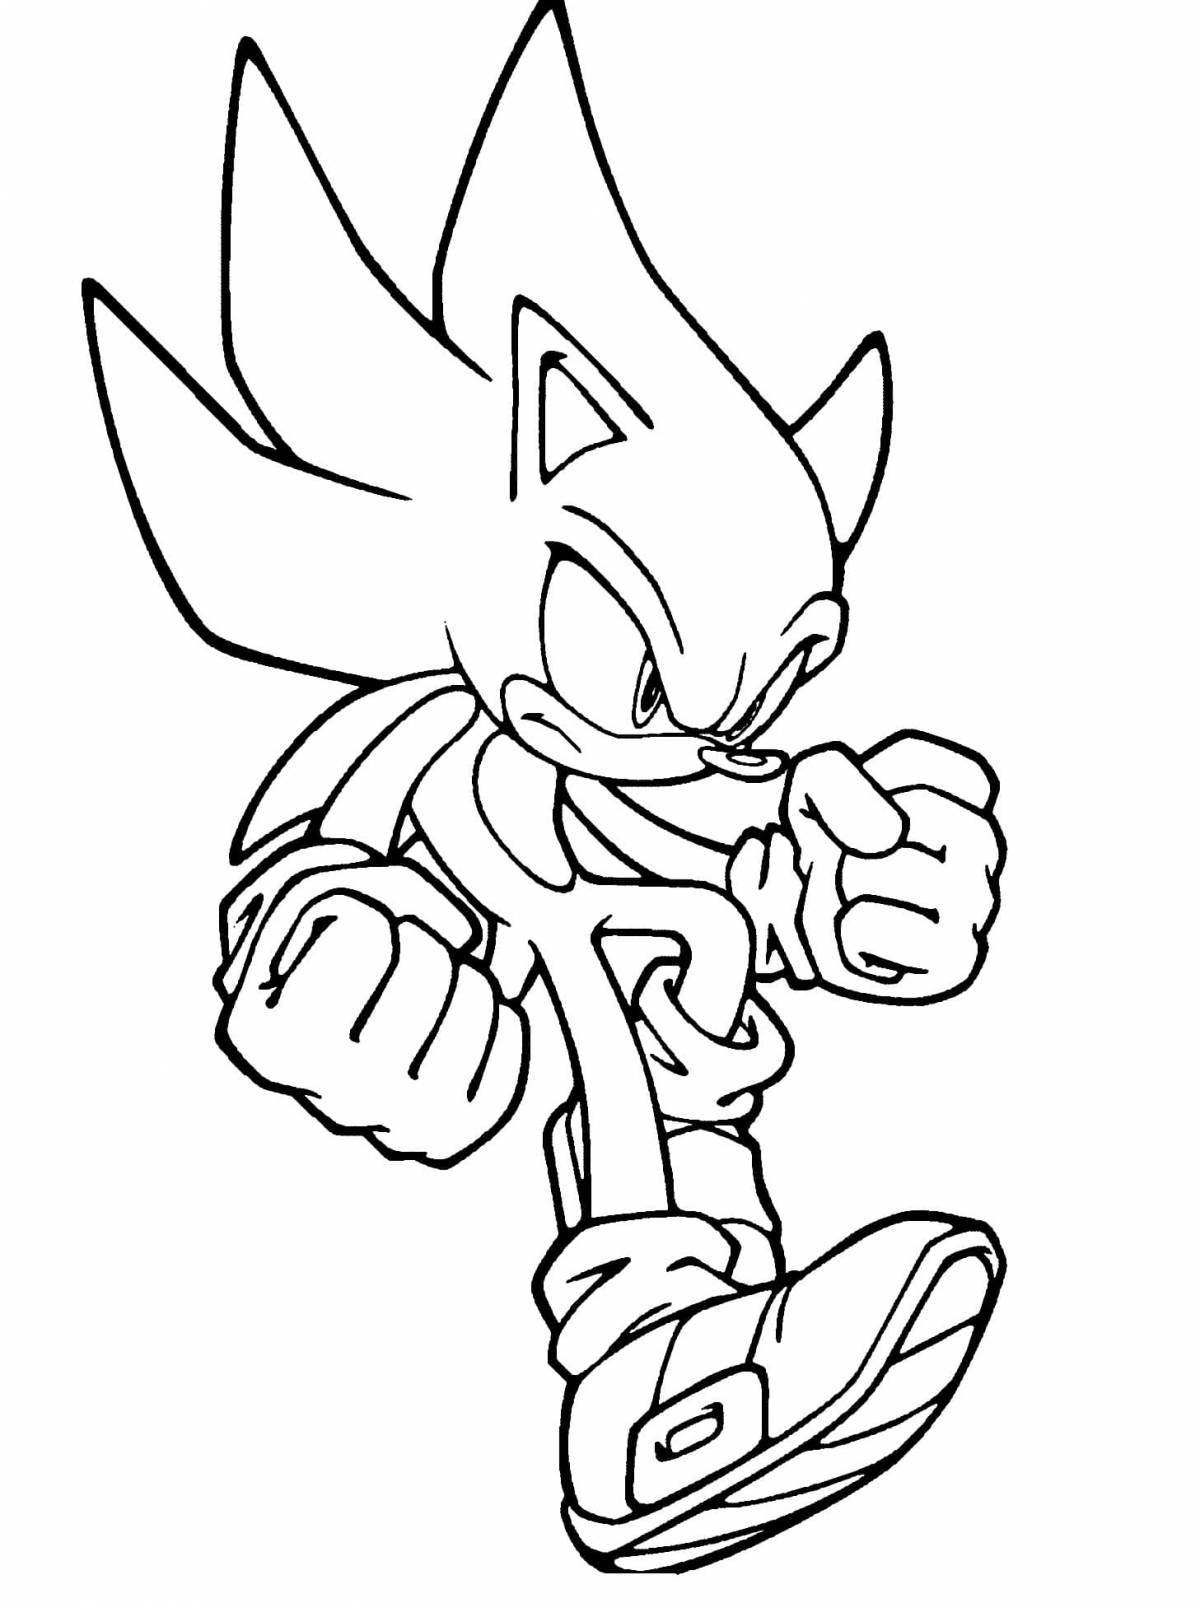 Exquisite sonic pictures coloring book